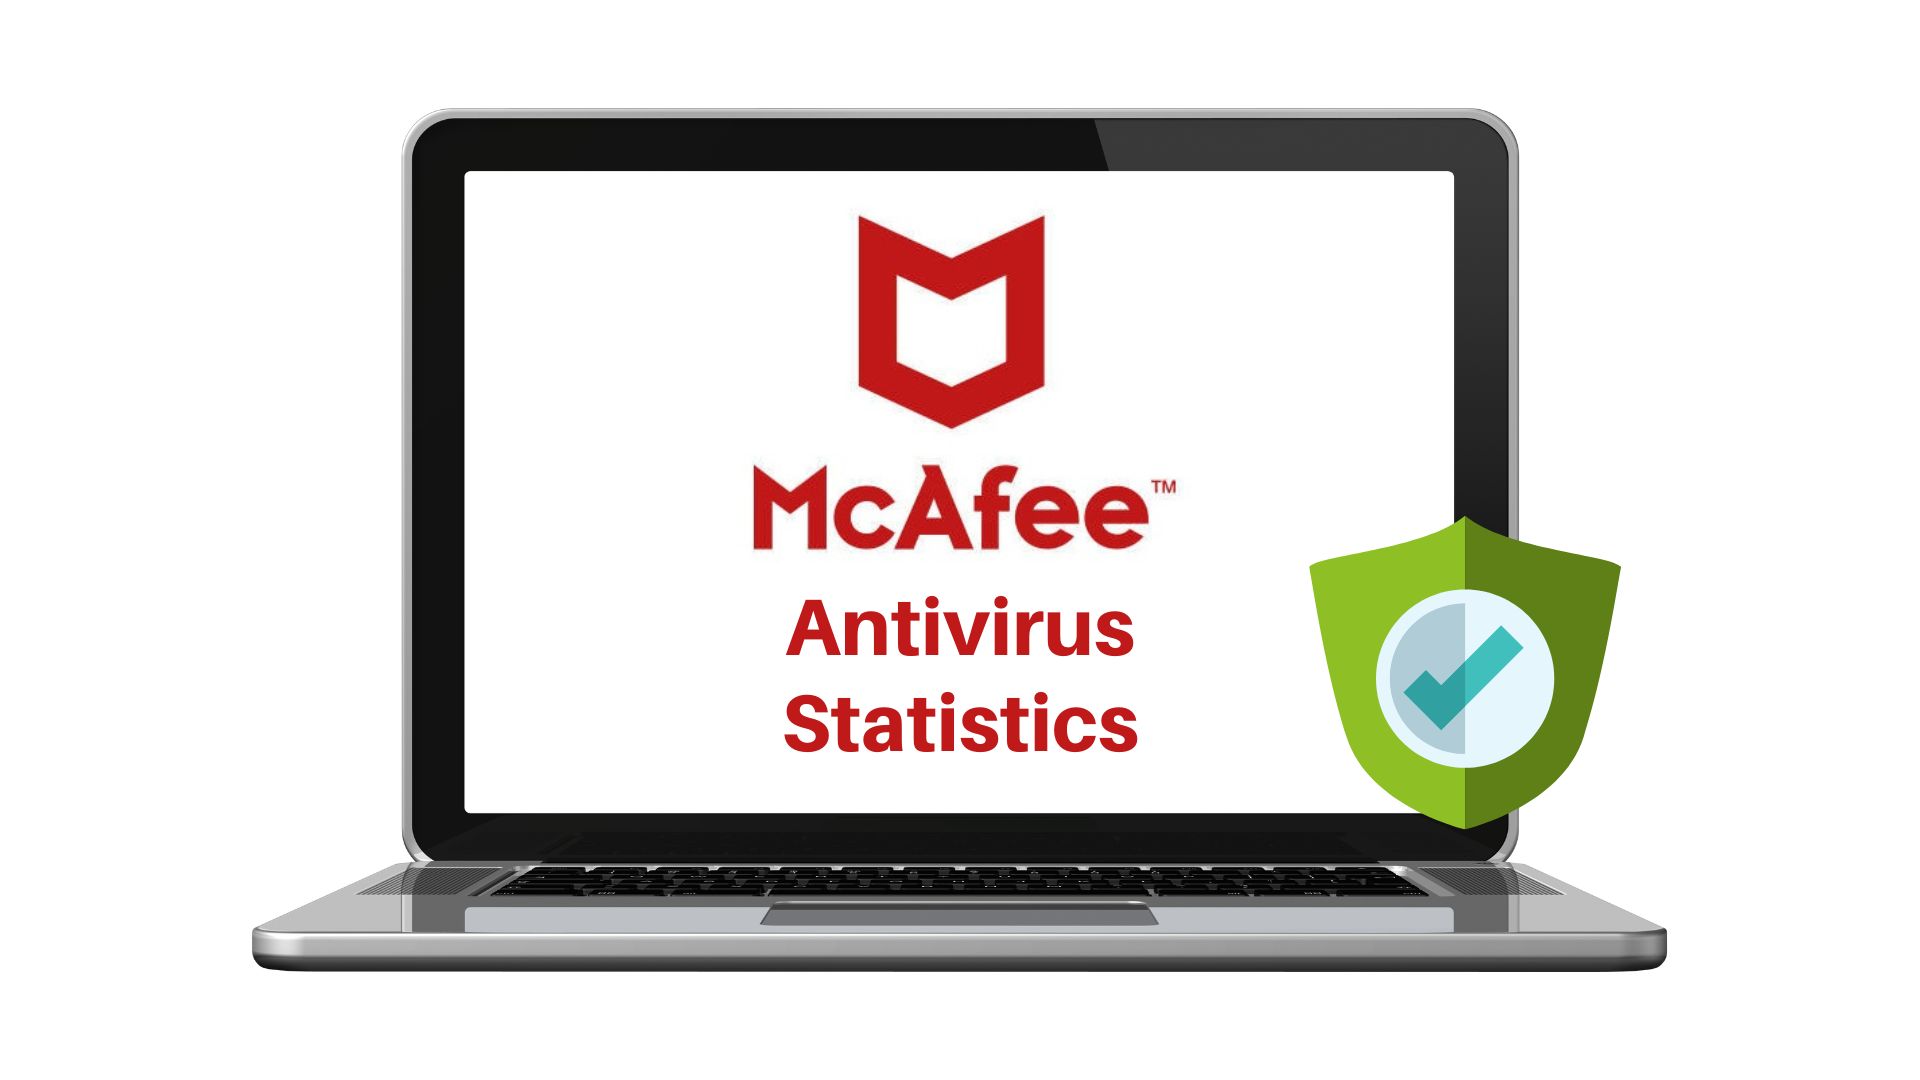 McAfee Antivirus Statistics 2022 Trends, Market Share, Cost And Facts